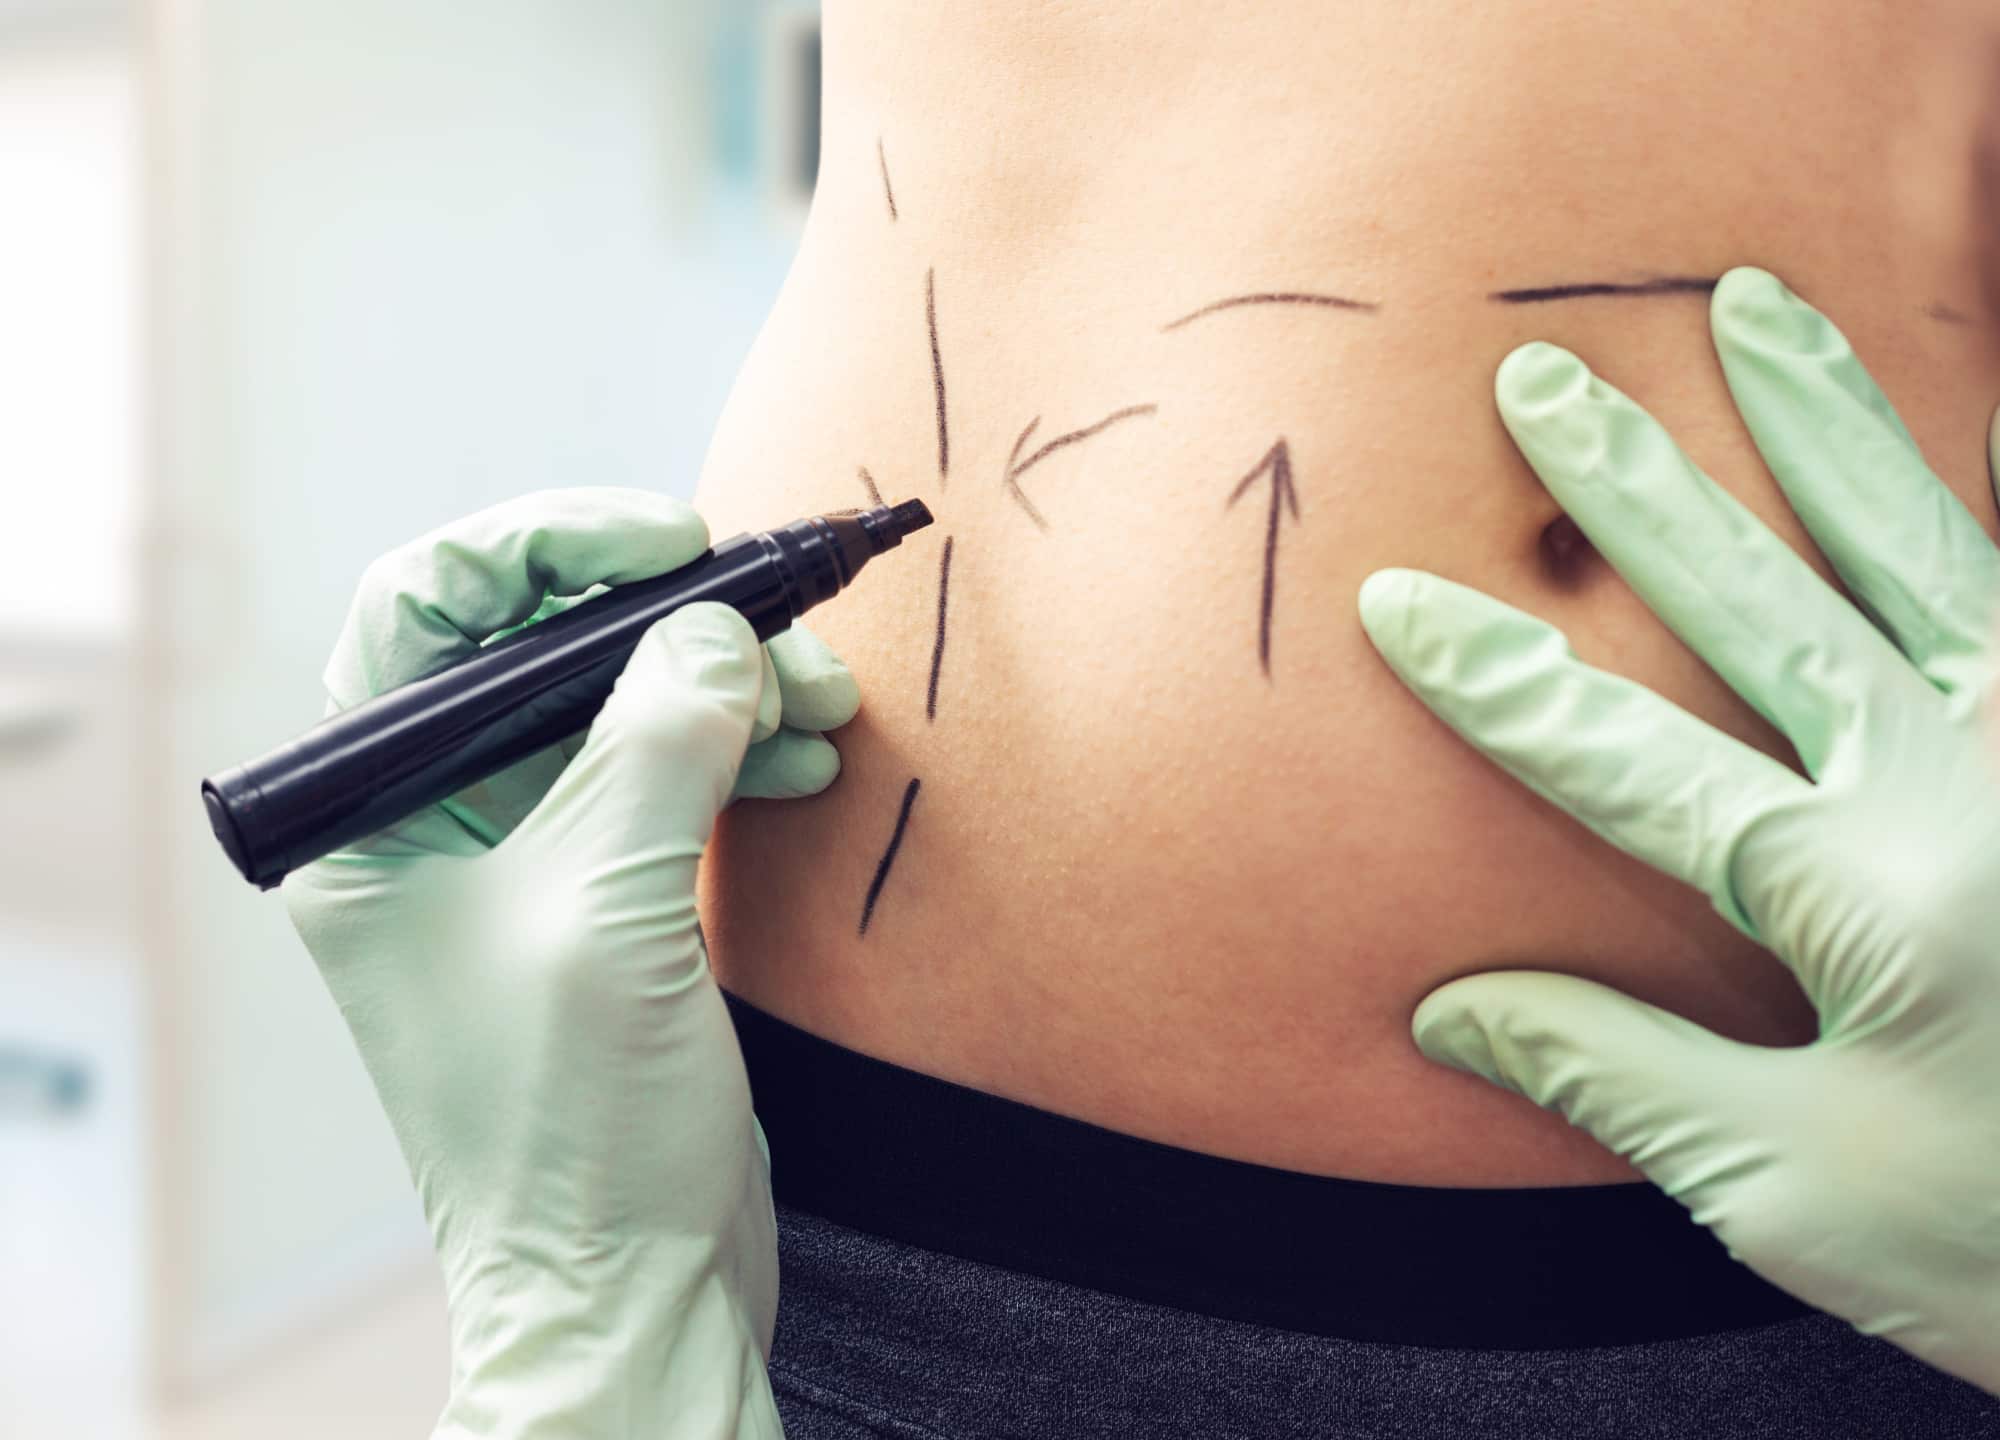 Tummy Tuck or Liposuction: What's the Difference?